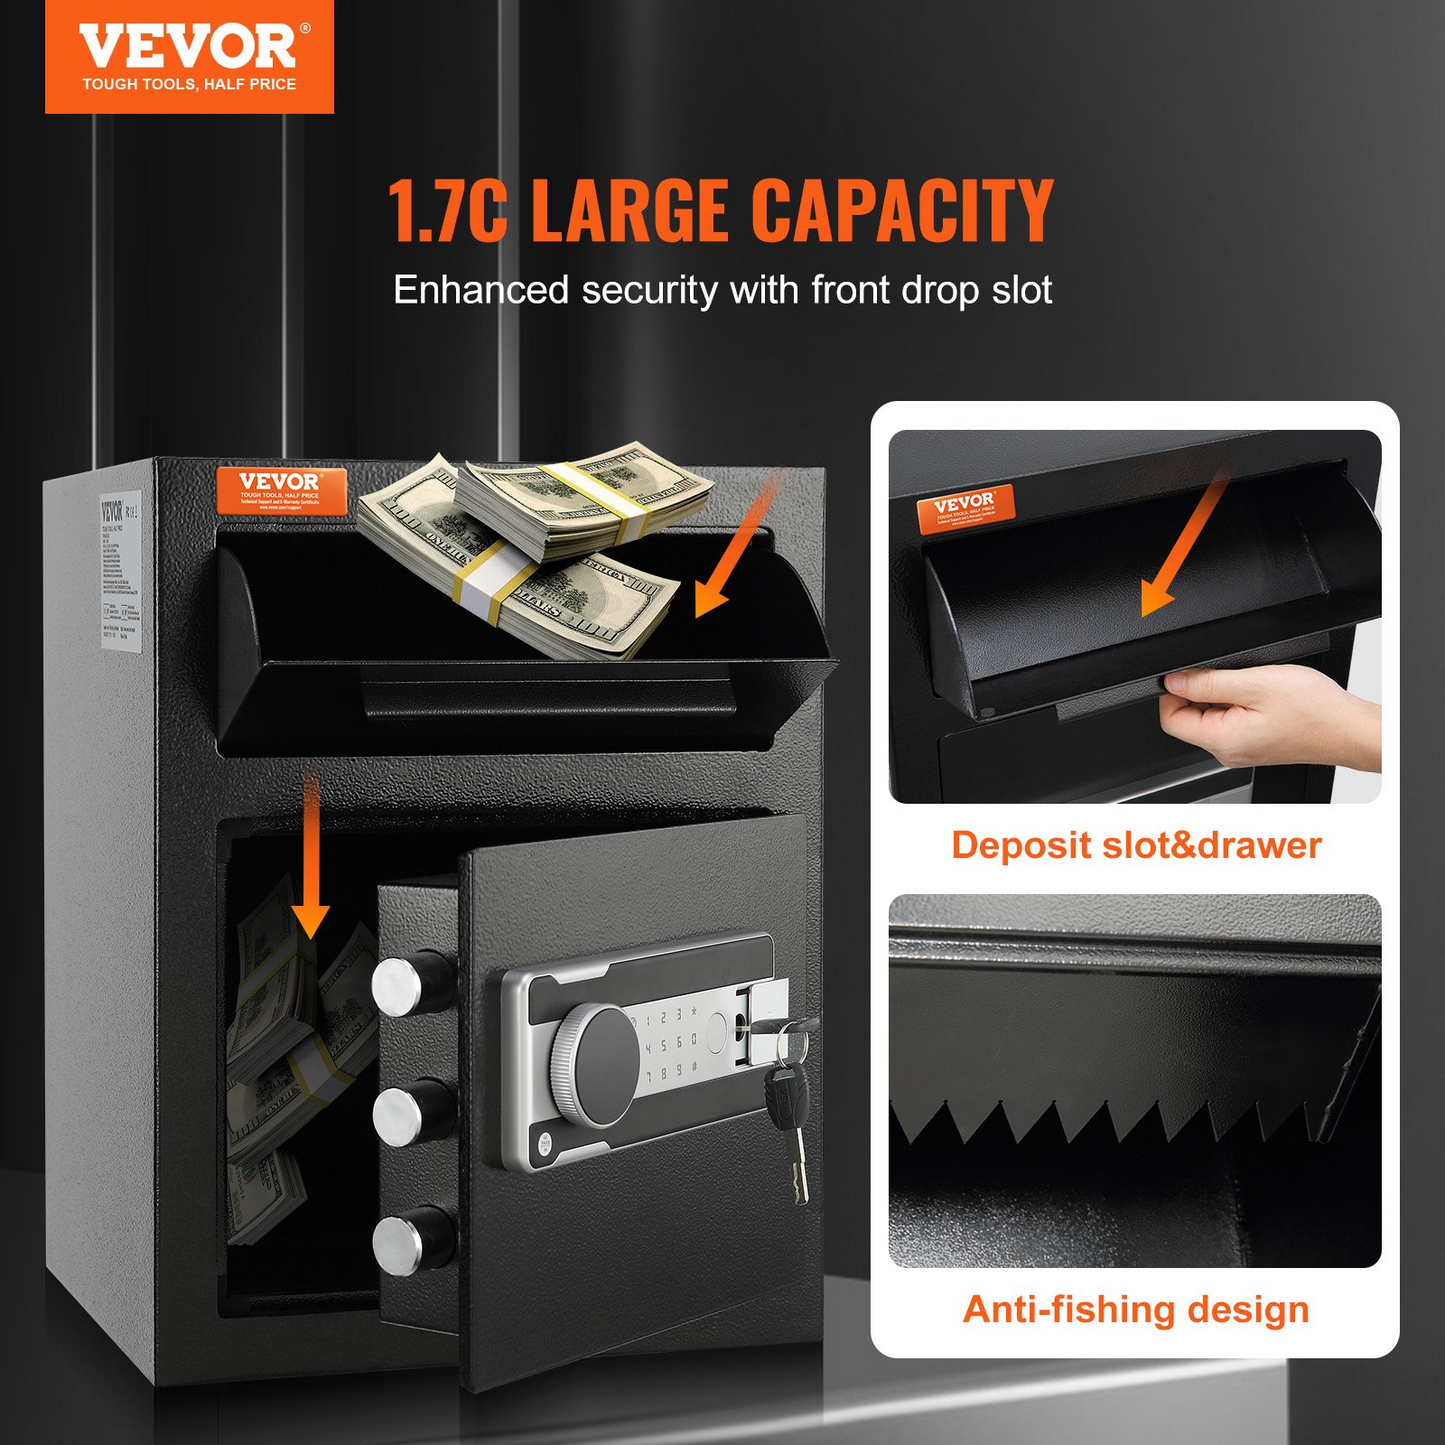 VEVOR 1.7 Cub Depository Safe, Deposit Safe with Drop Slot, Electronic Code Lock and 2 Emergency Keys, 17.71'' x 13.77'' x 13.77'' Business Drop Slot Safe for Cash, Mail in Home, Hotel, Office, Goodies N Stuff